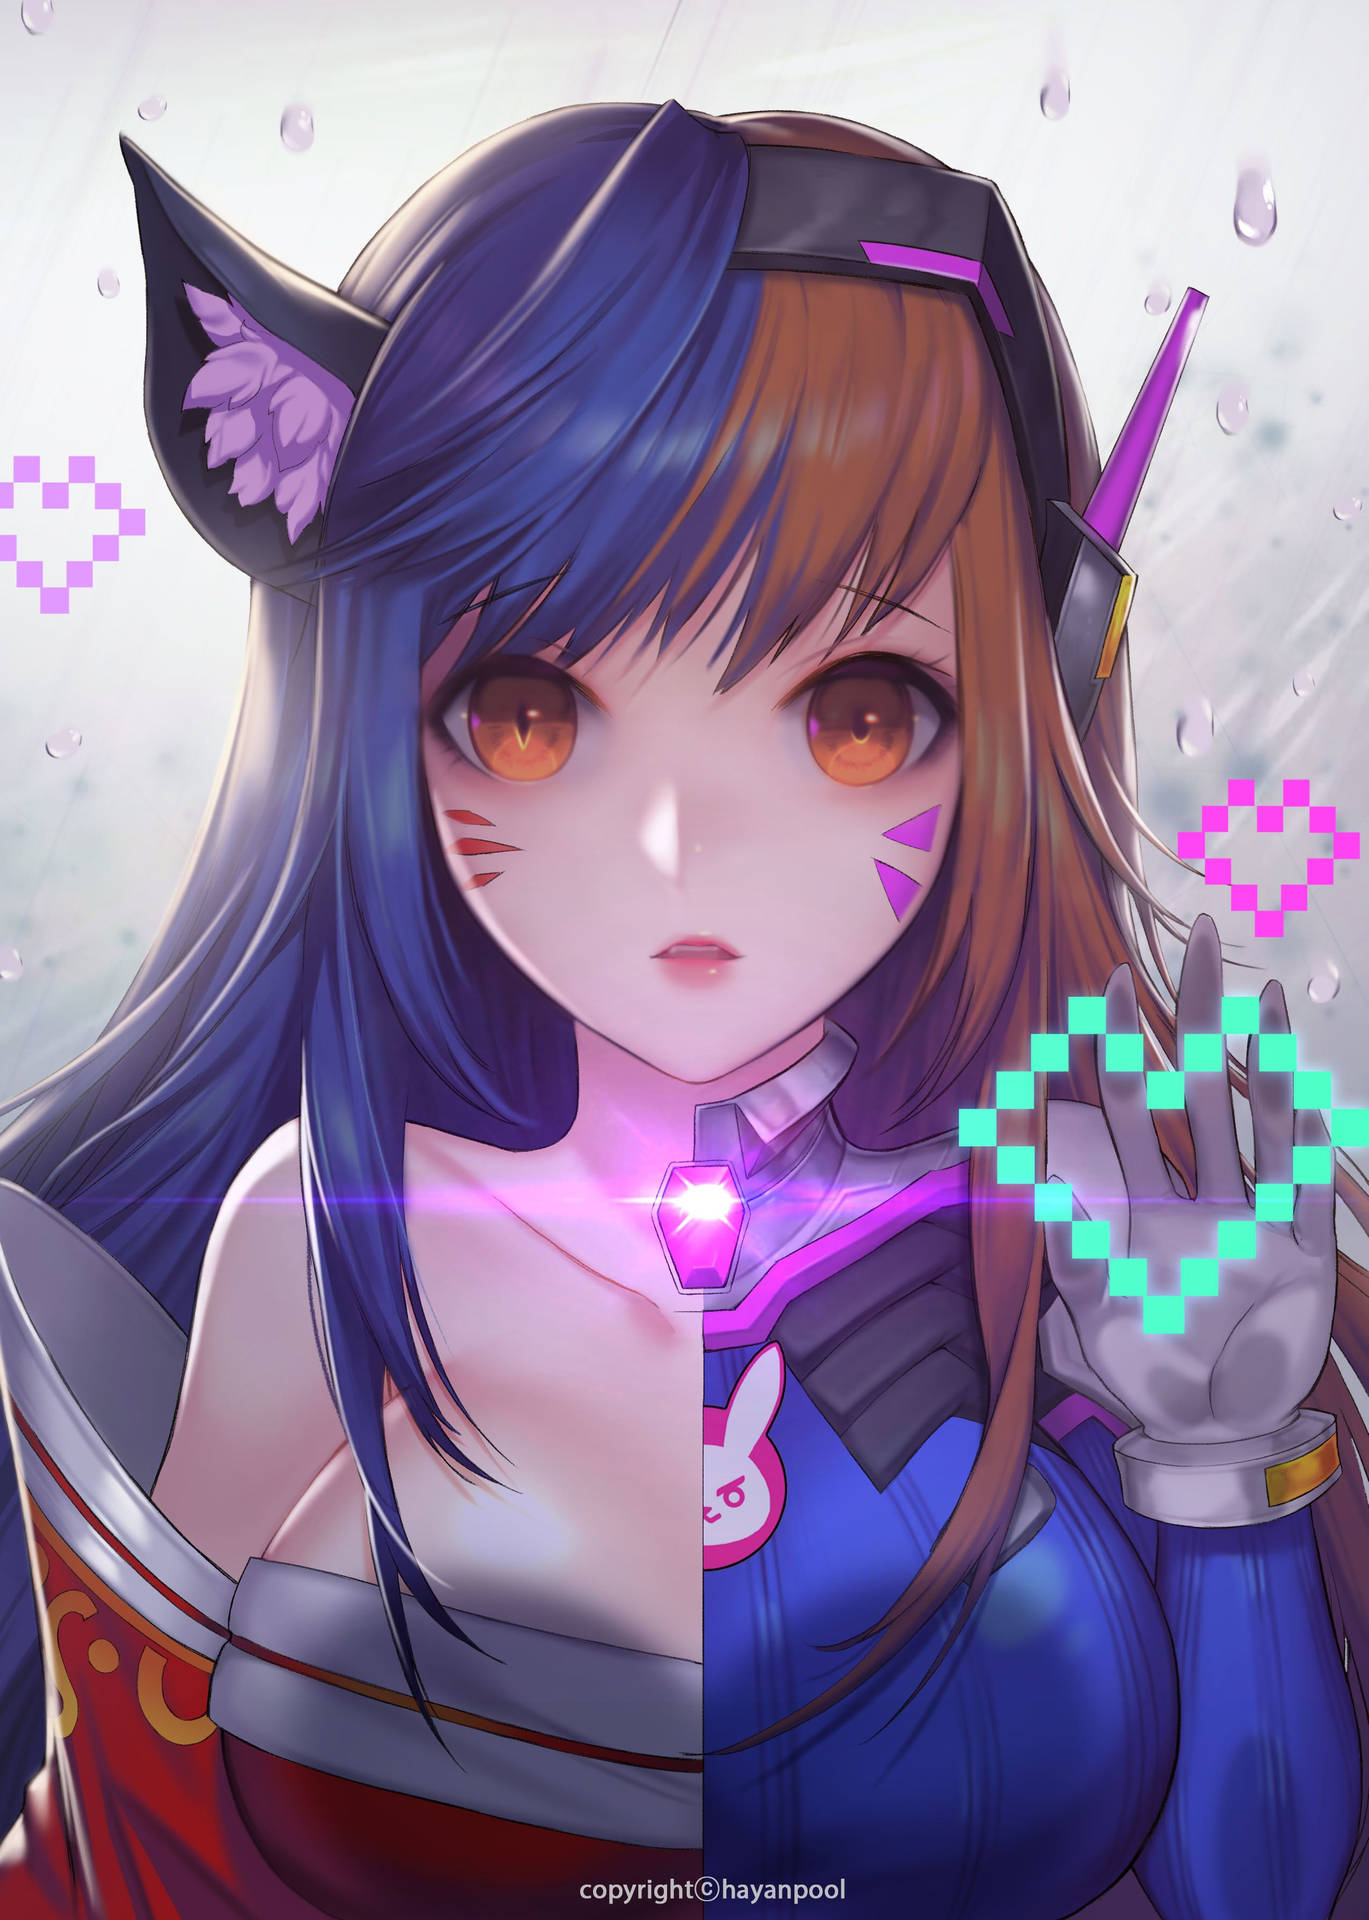 "Have a heart of pixels with Dva". Wallpaper